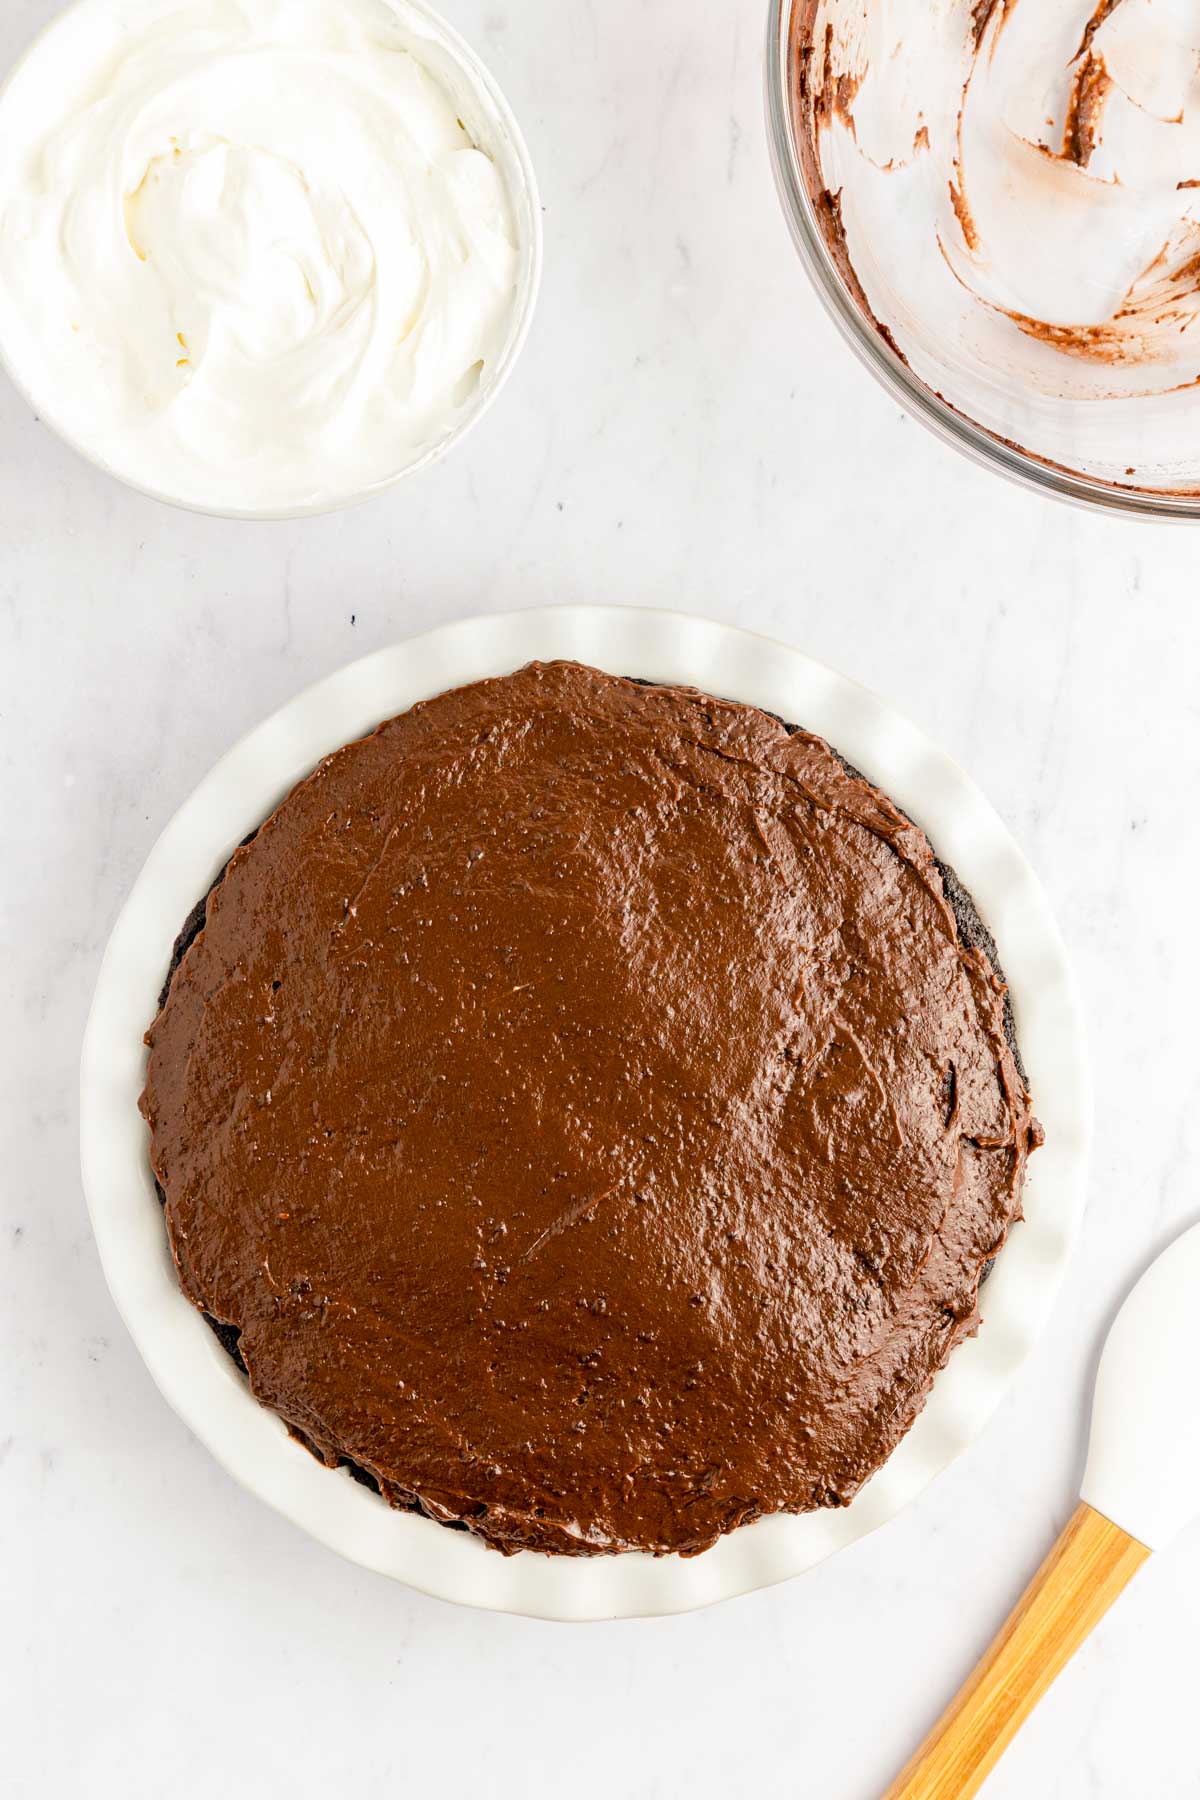 Chocolate pudding layer spread over a pie.